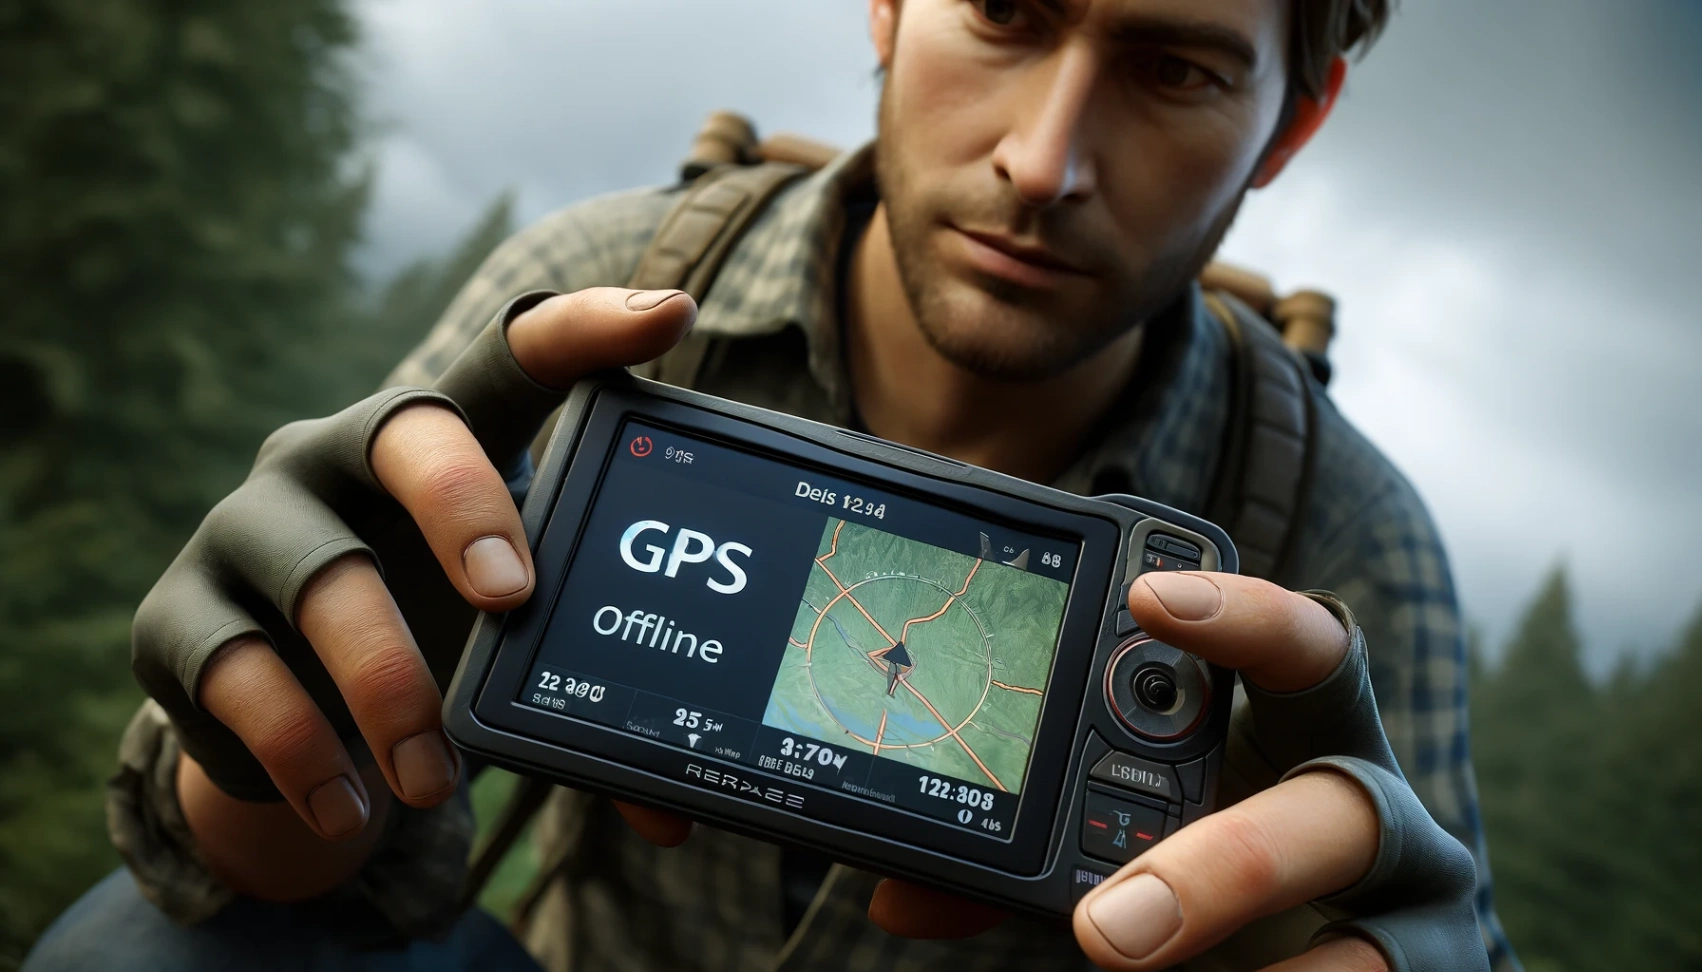 Learn How to Use GPS Offline - A Great and Free App